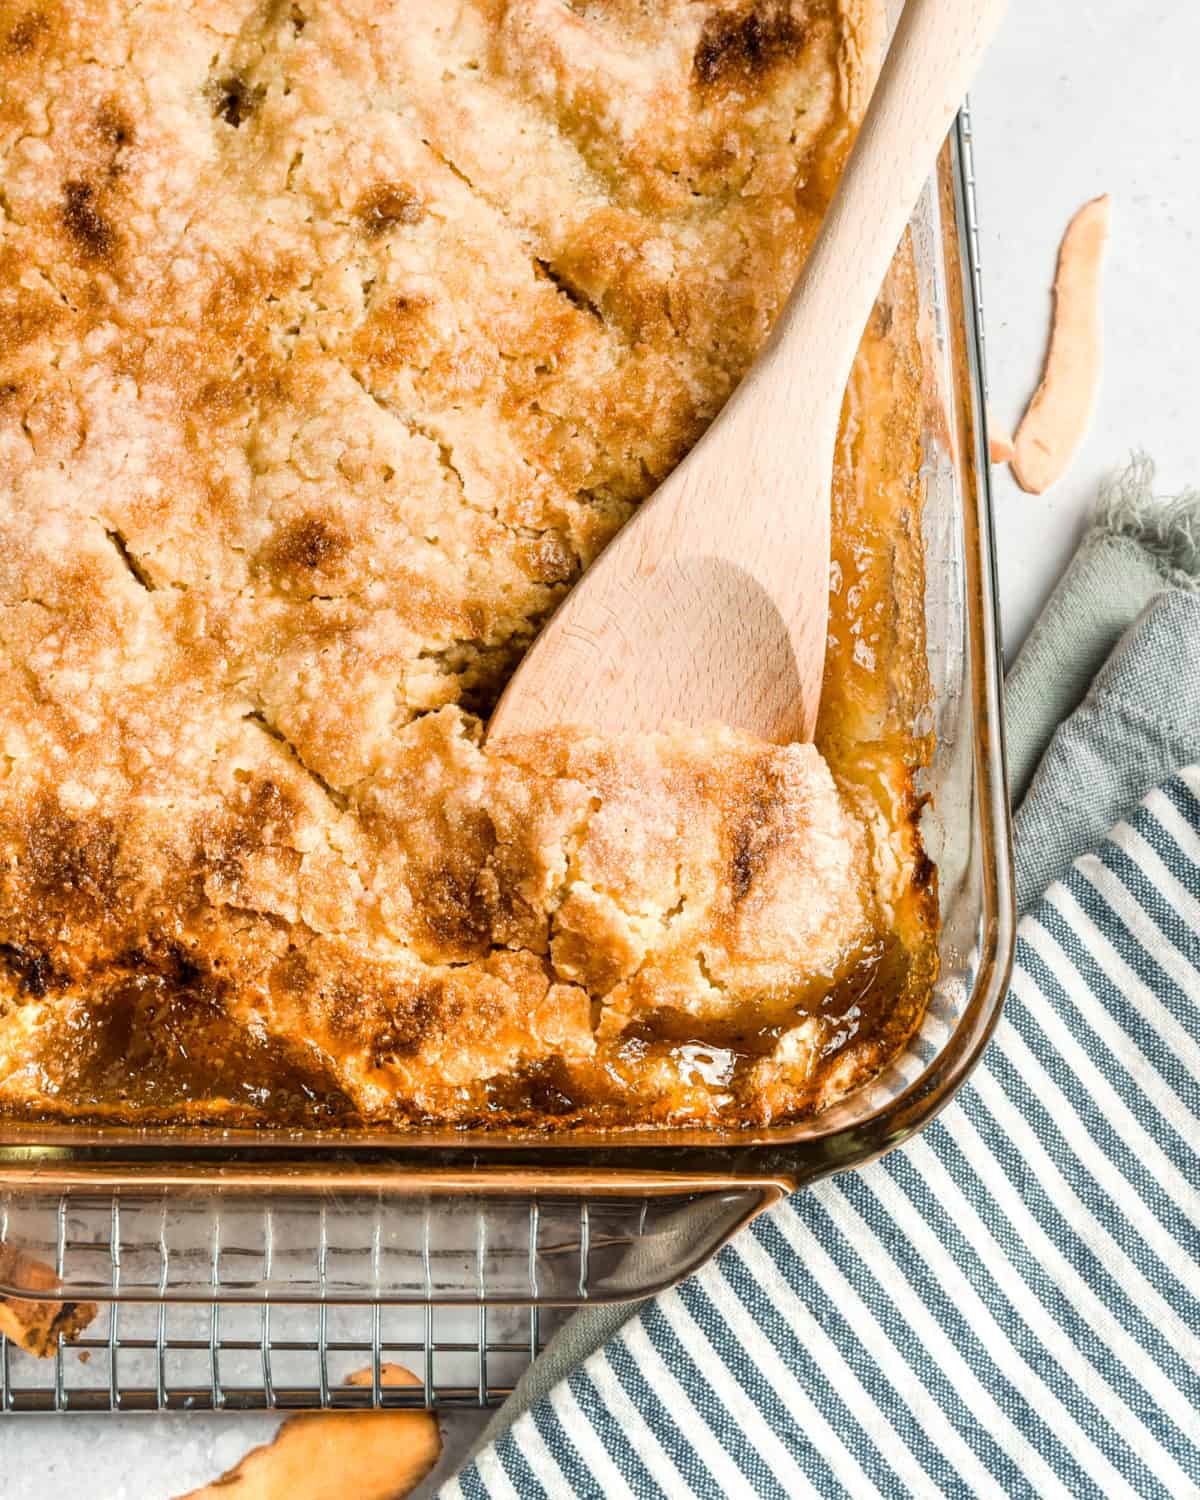 Cobbler in a baking dish with a wooden spoon.